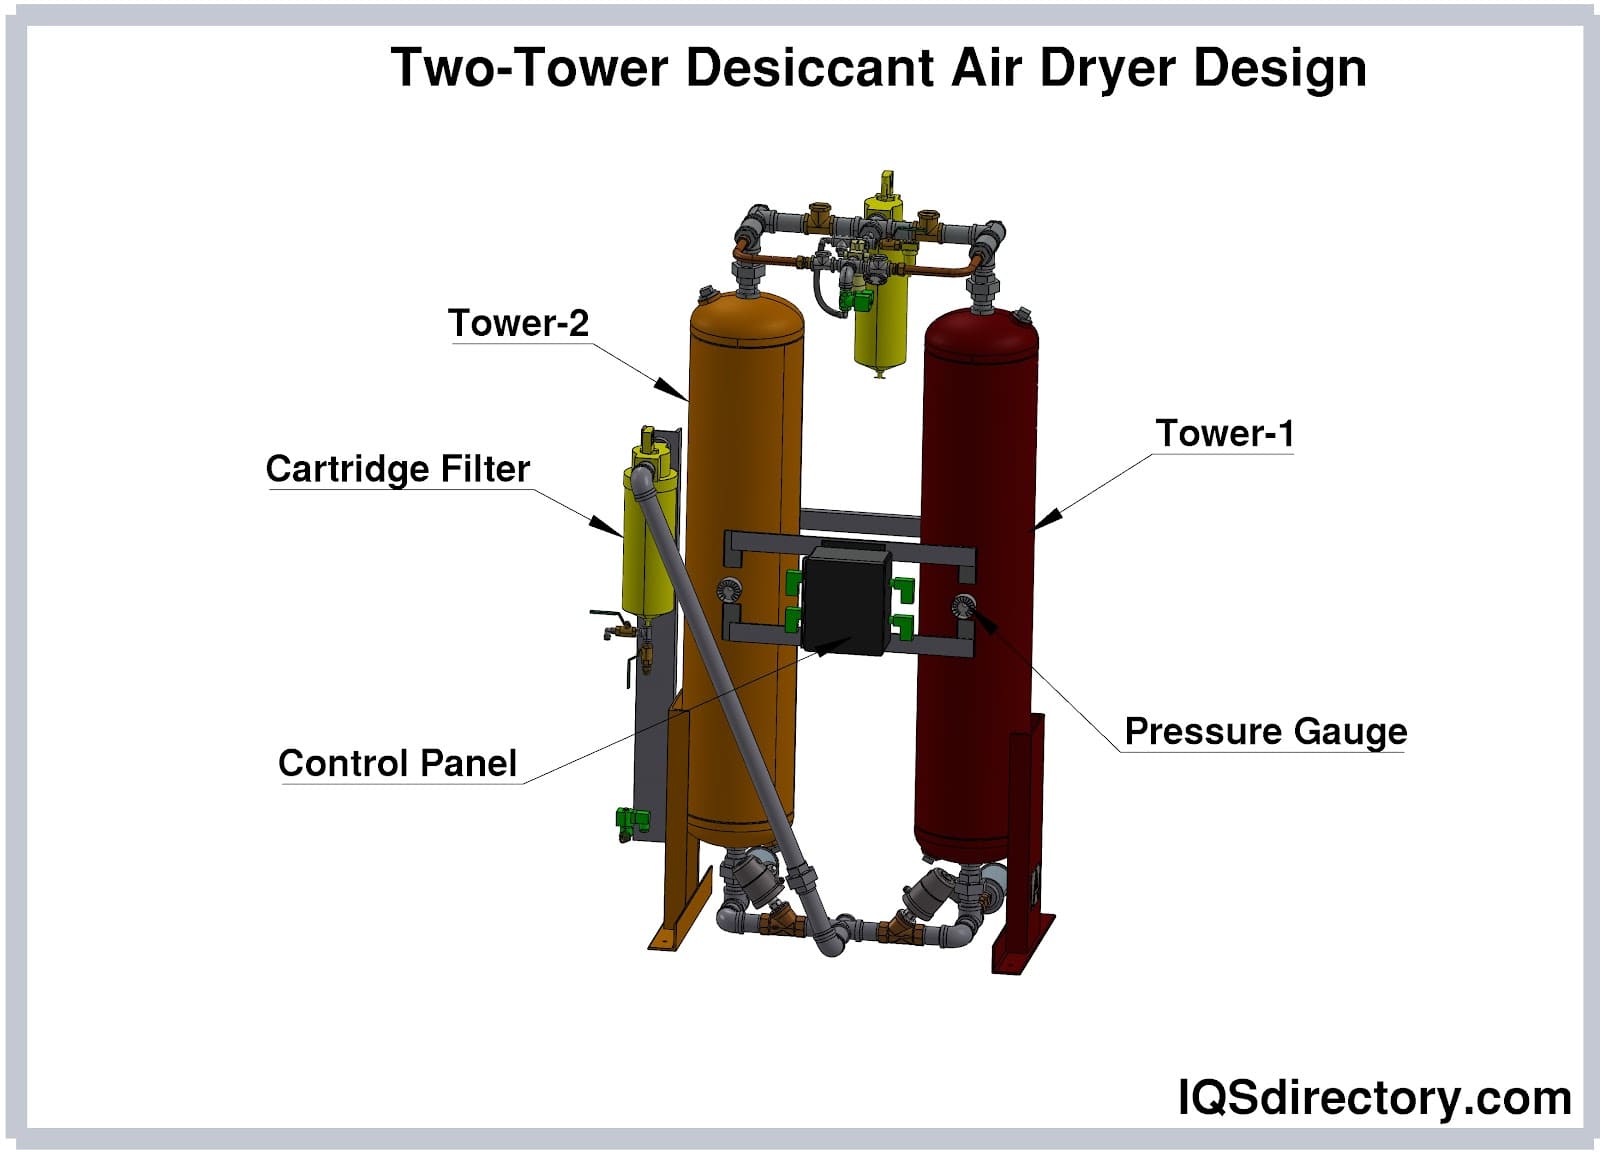 Two-tower Desiccant Air Dryer Design